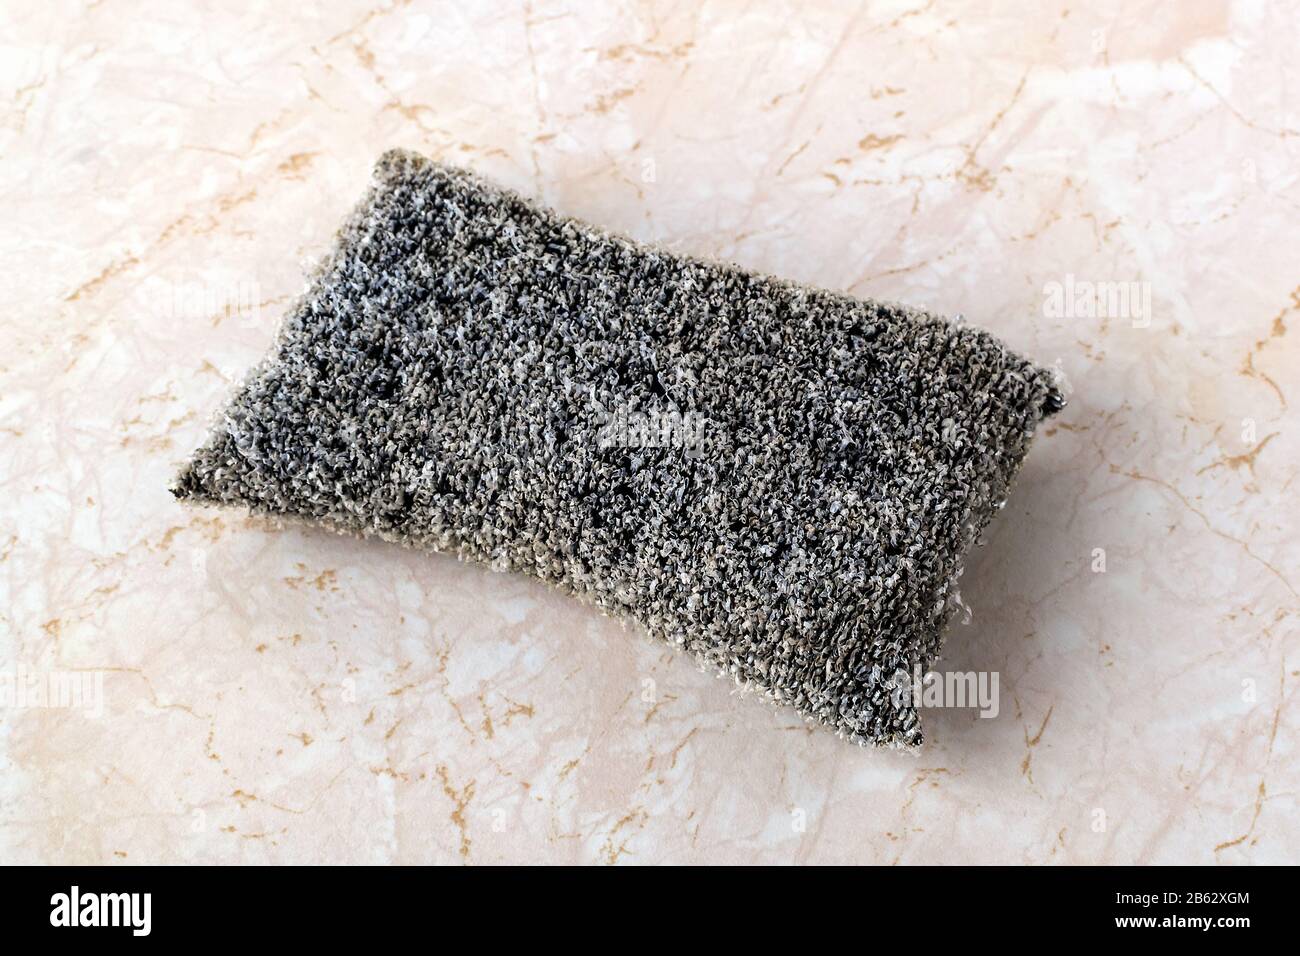 https://c8.alamy.com/comp/2B62XGM/old-silver-foam-sponge-for-dishwashing-on-a-kithen-table-metallized-fiber-foam-sponge-for-dishes-and-housework-purity-and-household-chores-2B62XGM.jpg